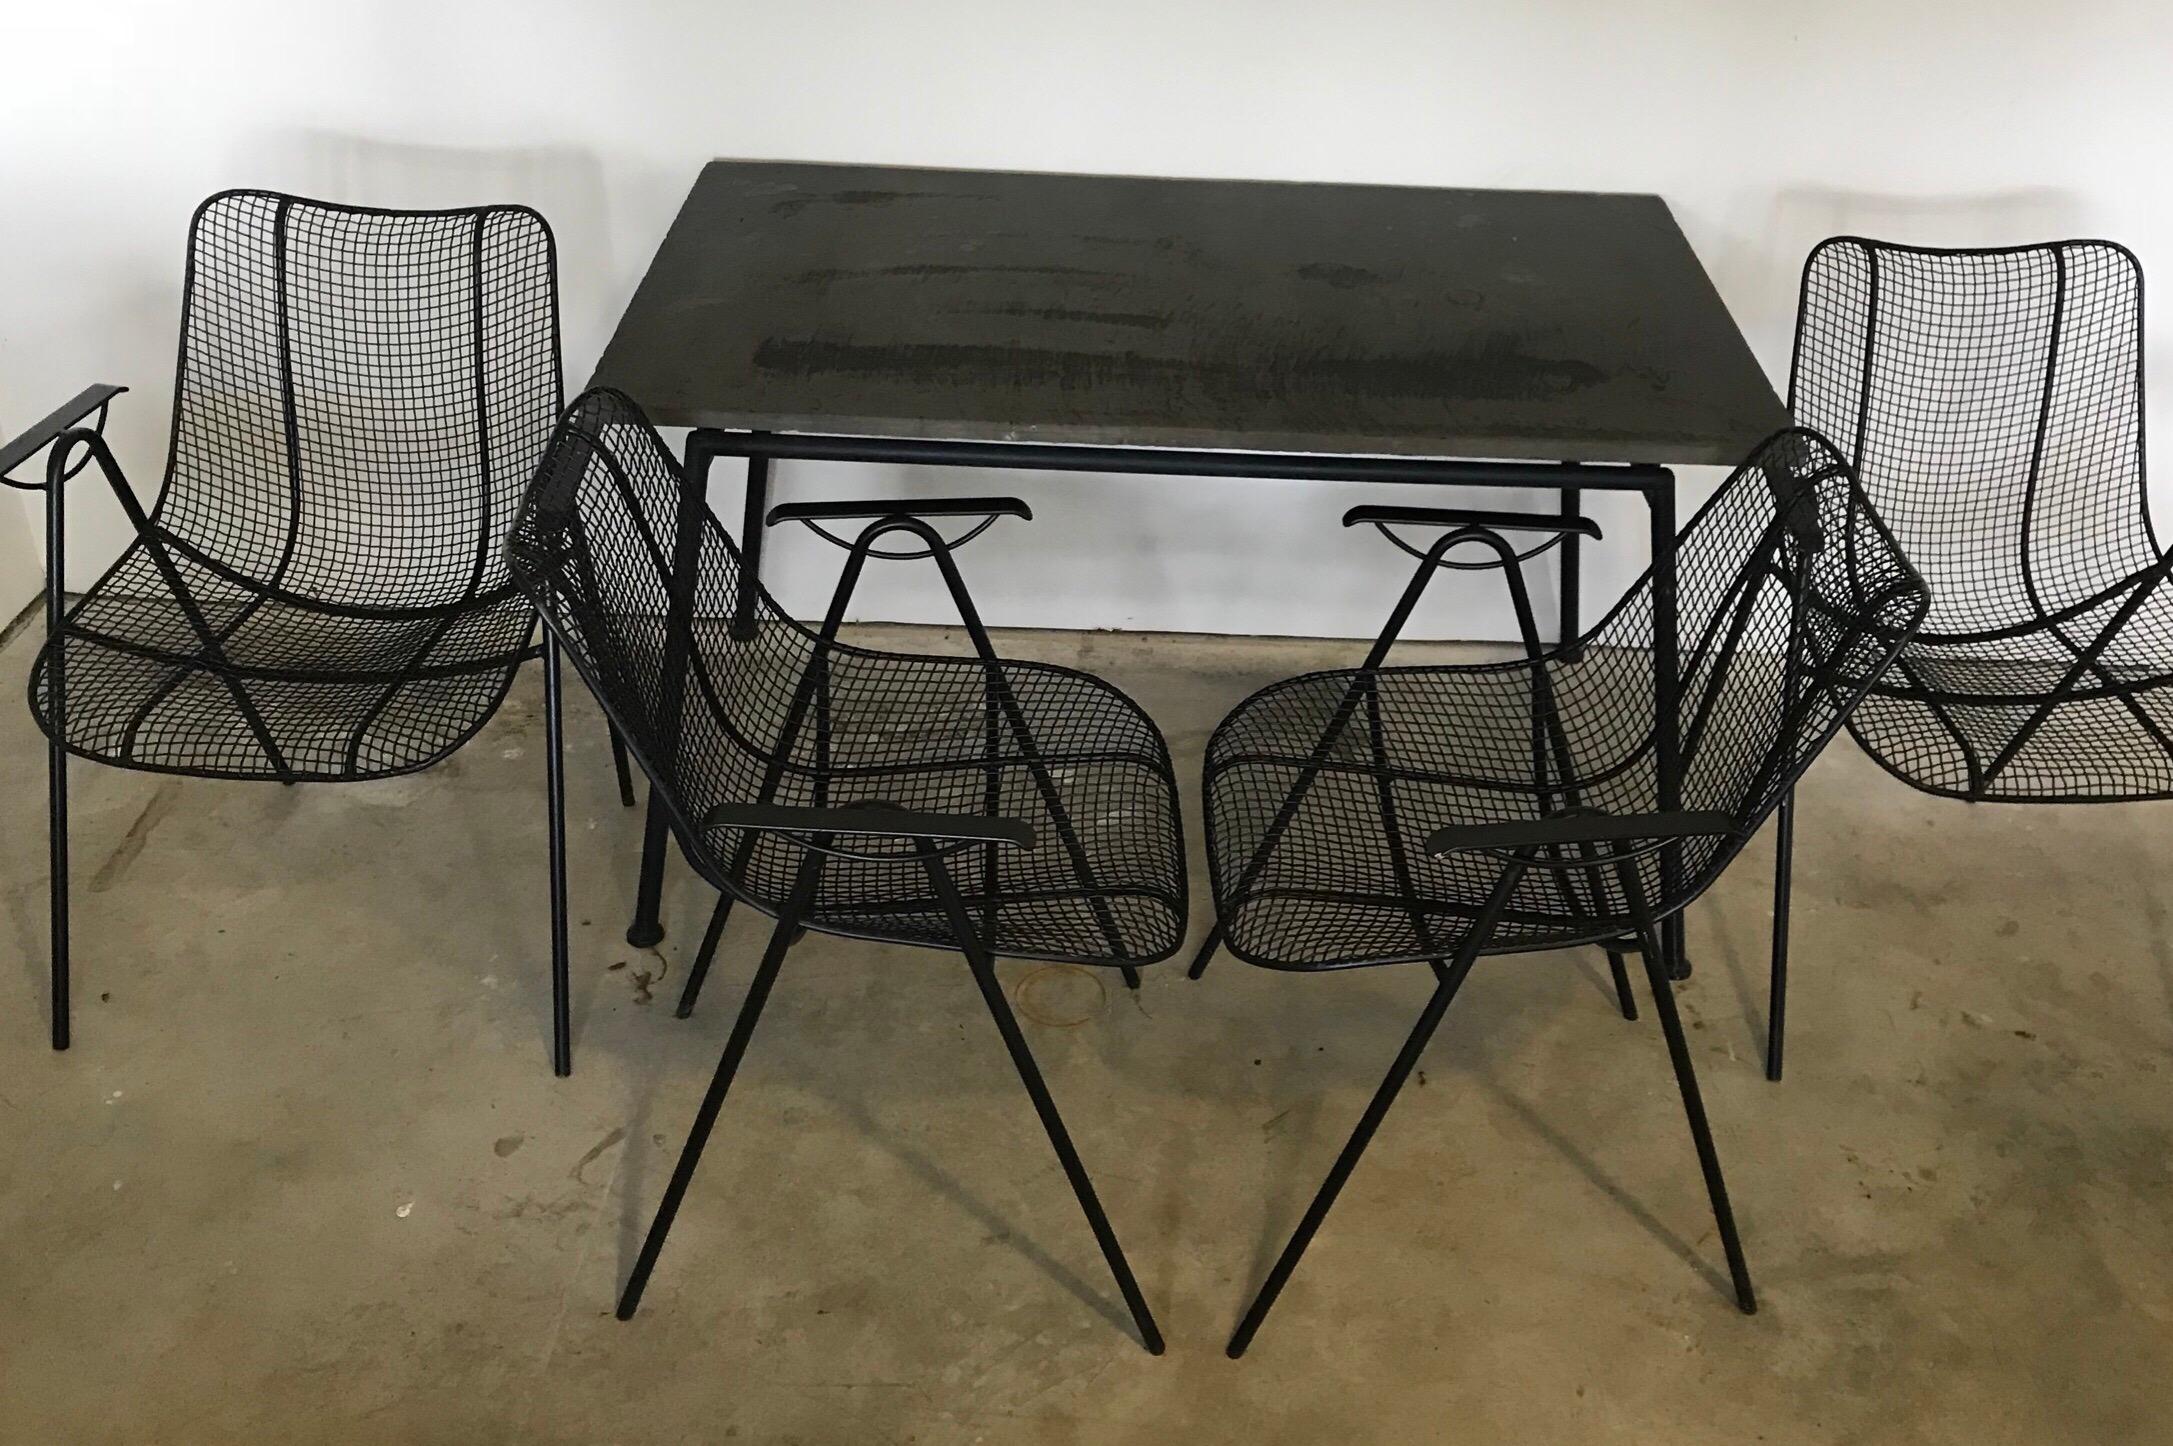 Mid-20th Century Mid Century Woodard Slate Top Patio Table with Four Wrought Iron Chairs, 1950s